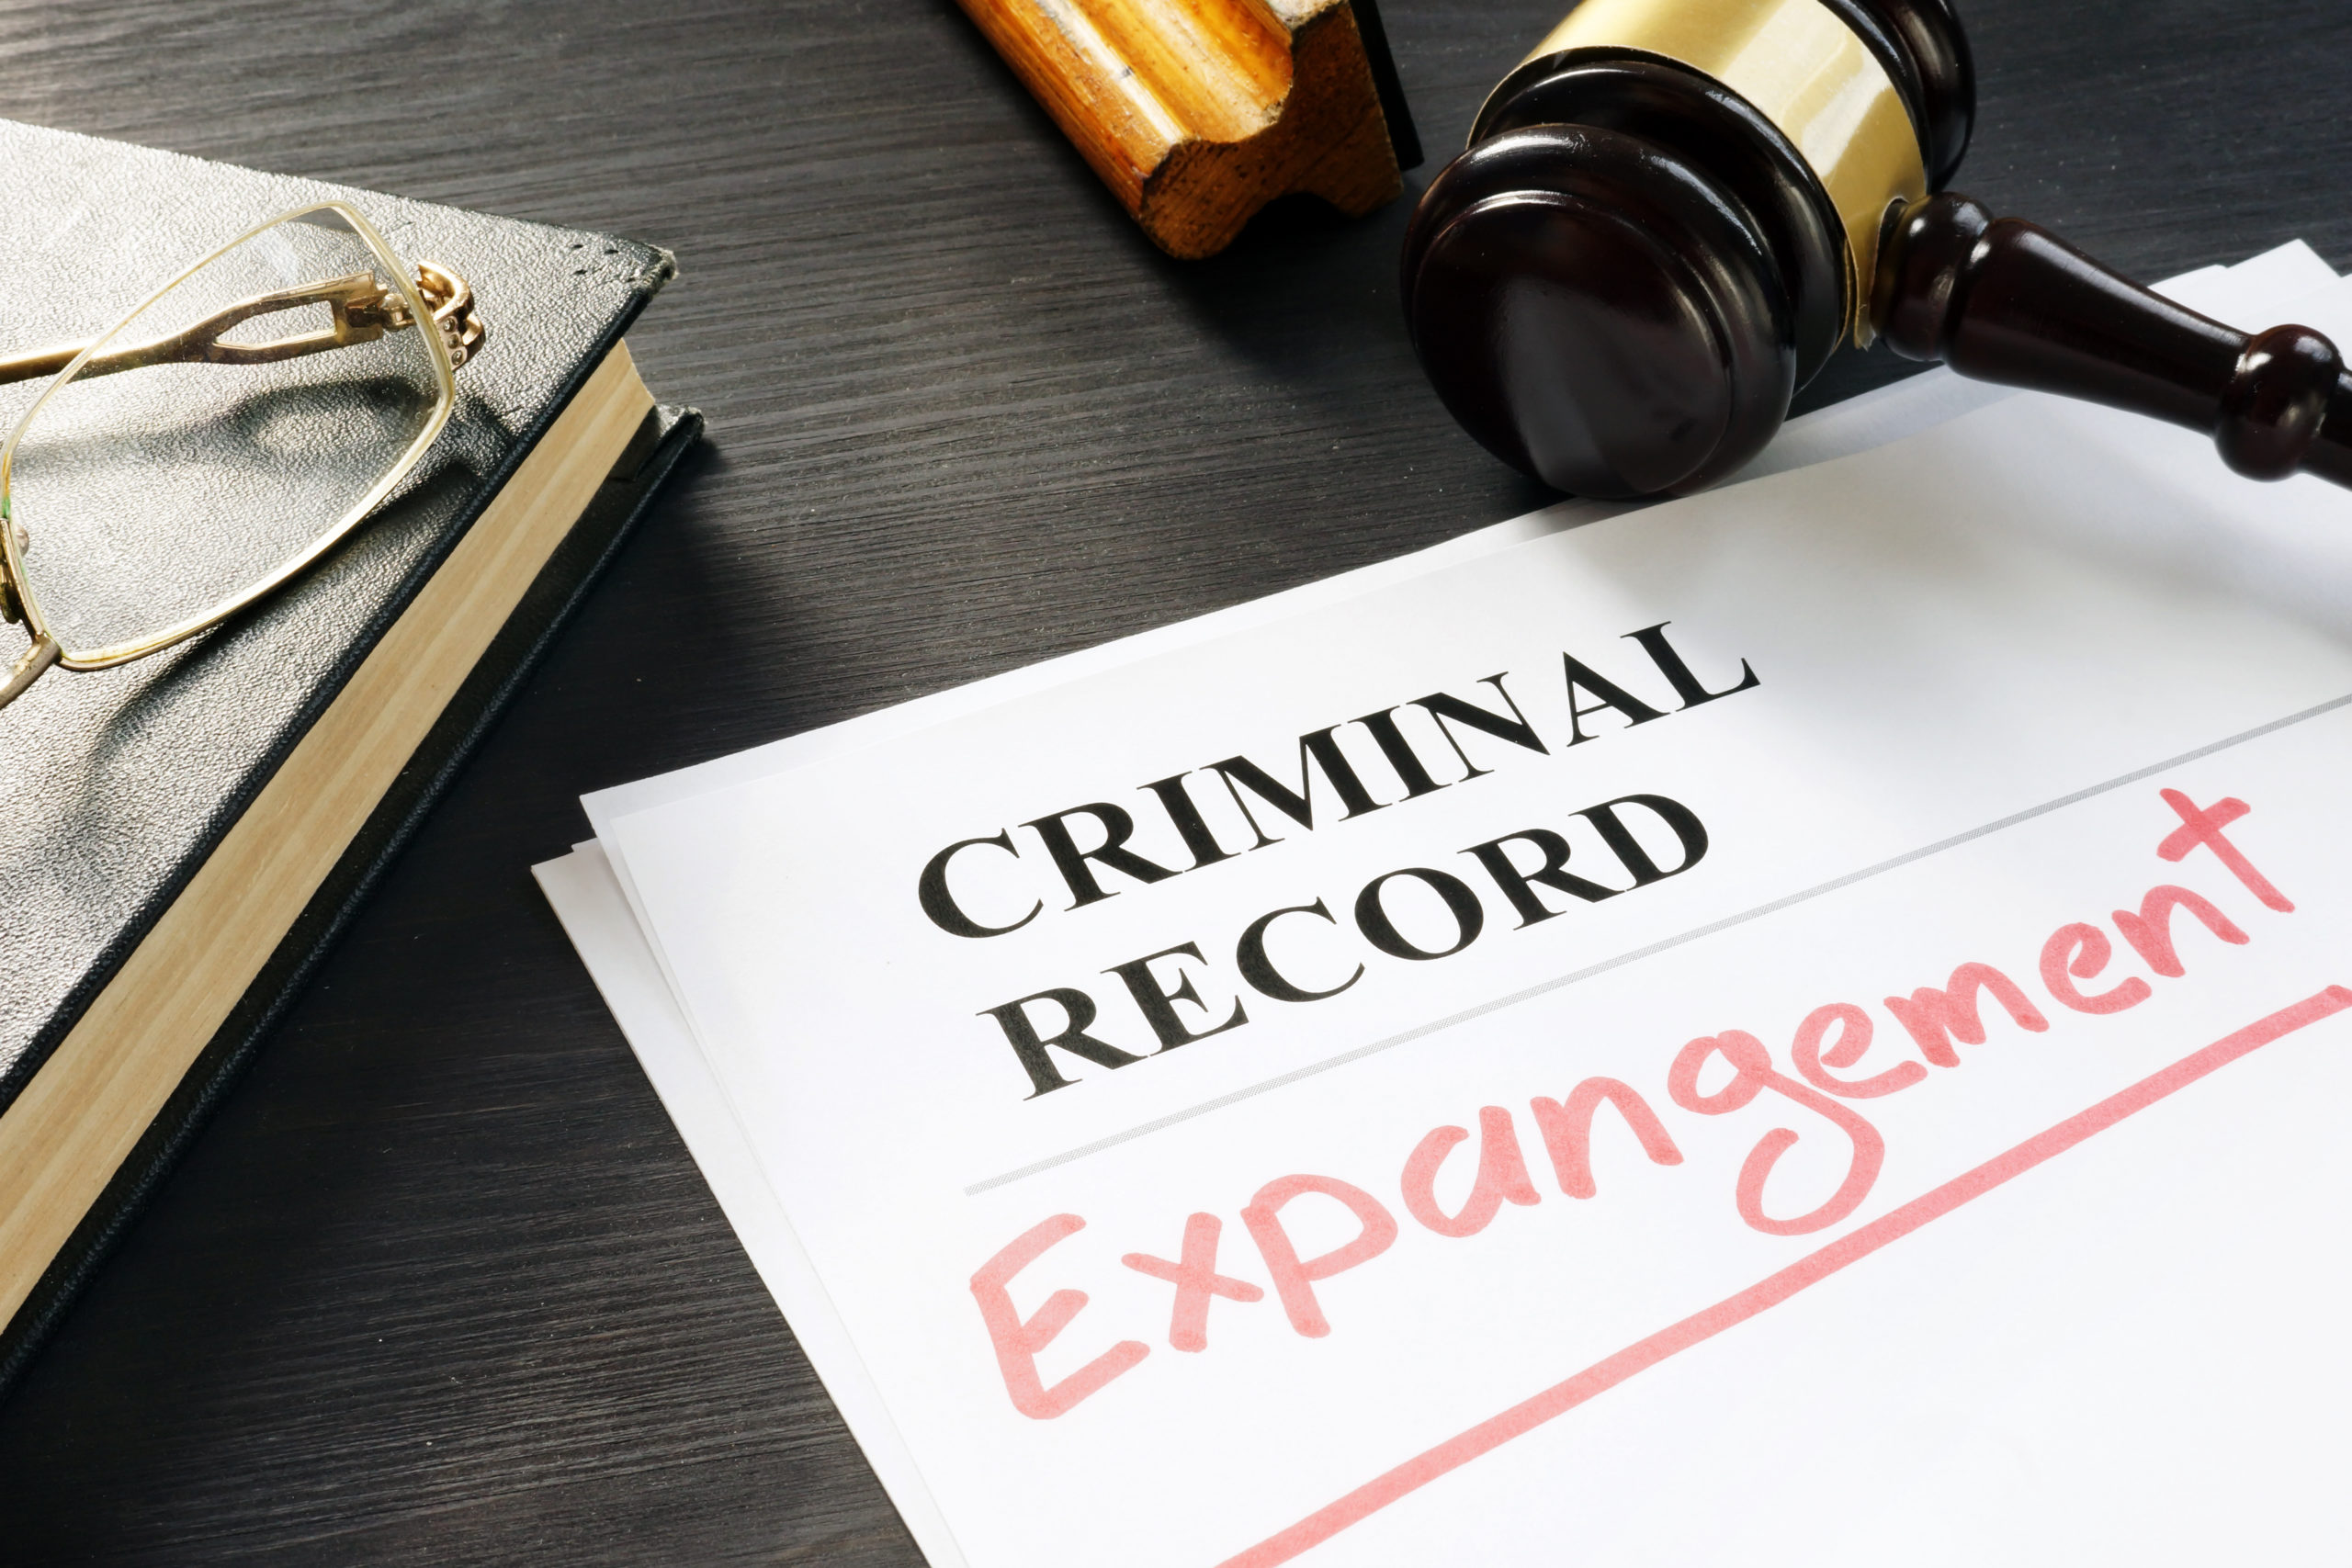 What Crimes Can Be Expunged In Virginia, And How?